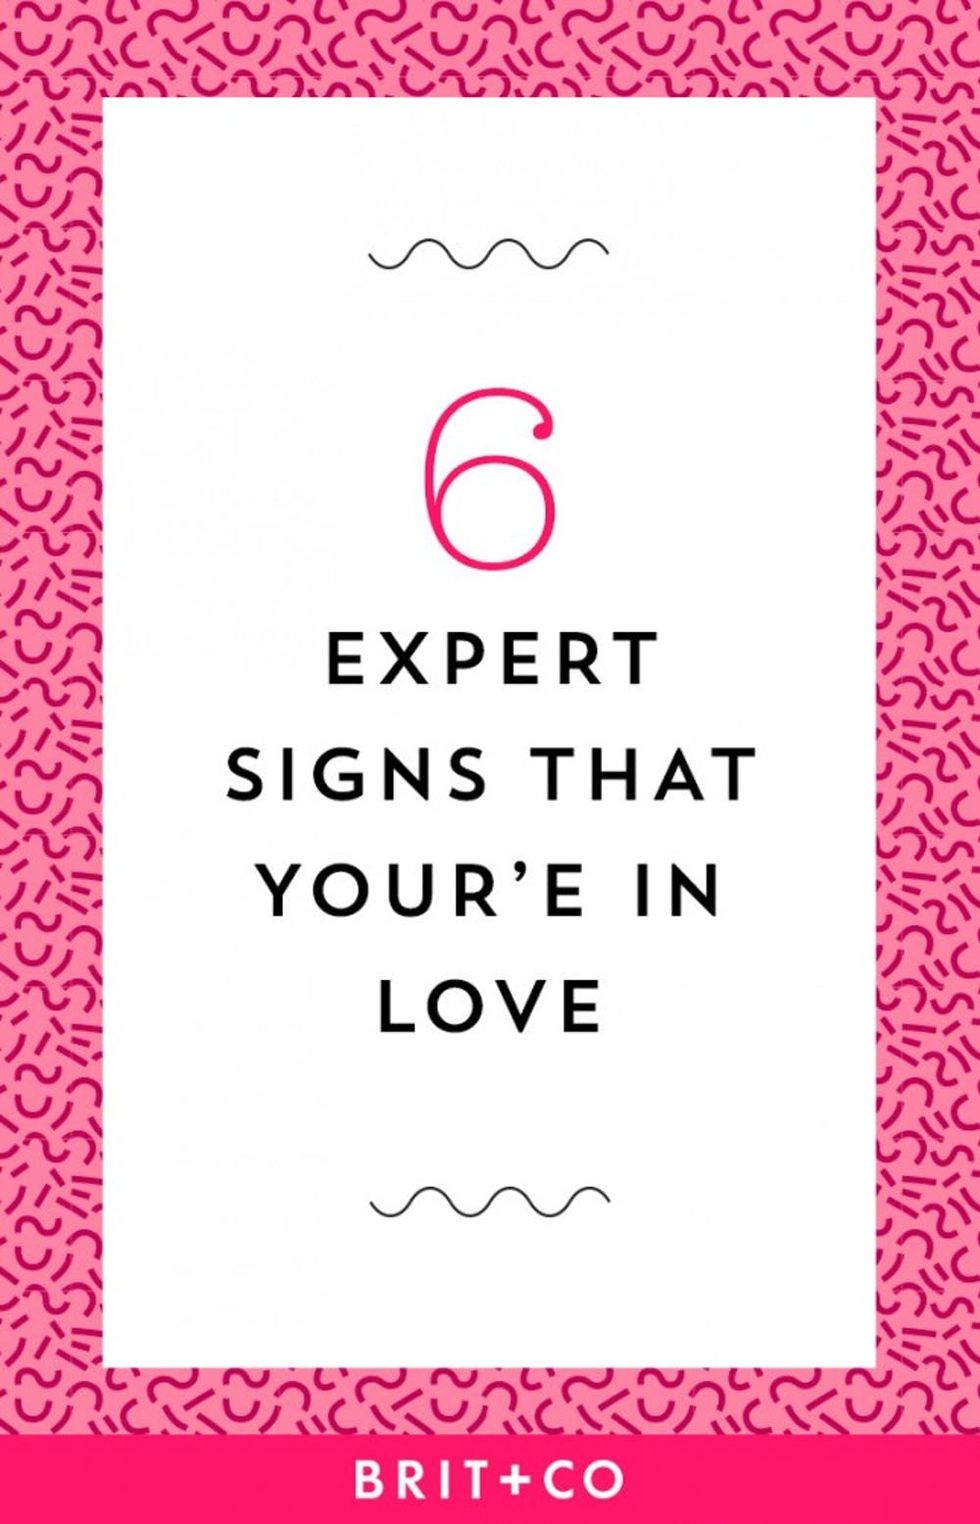 Is it love or just a fling? Here's how to find out.